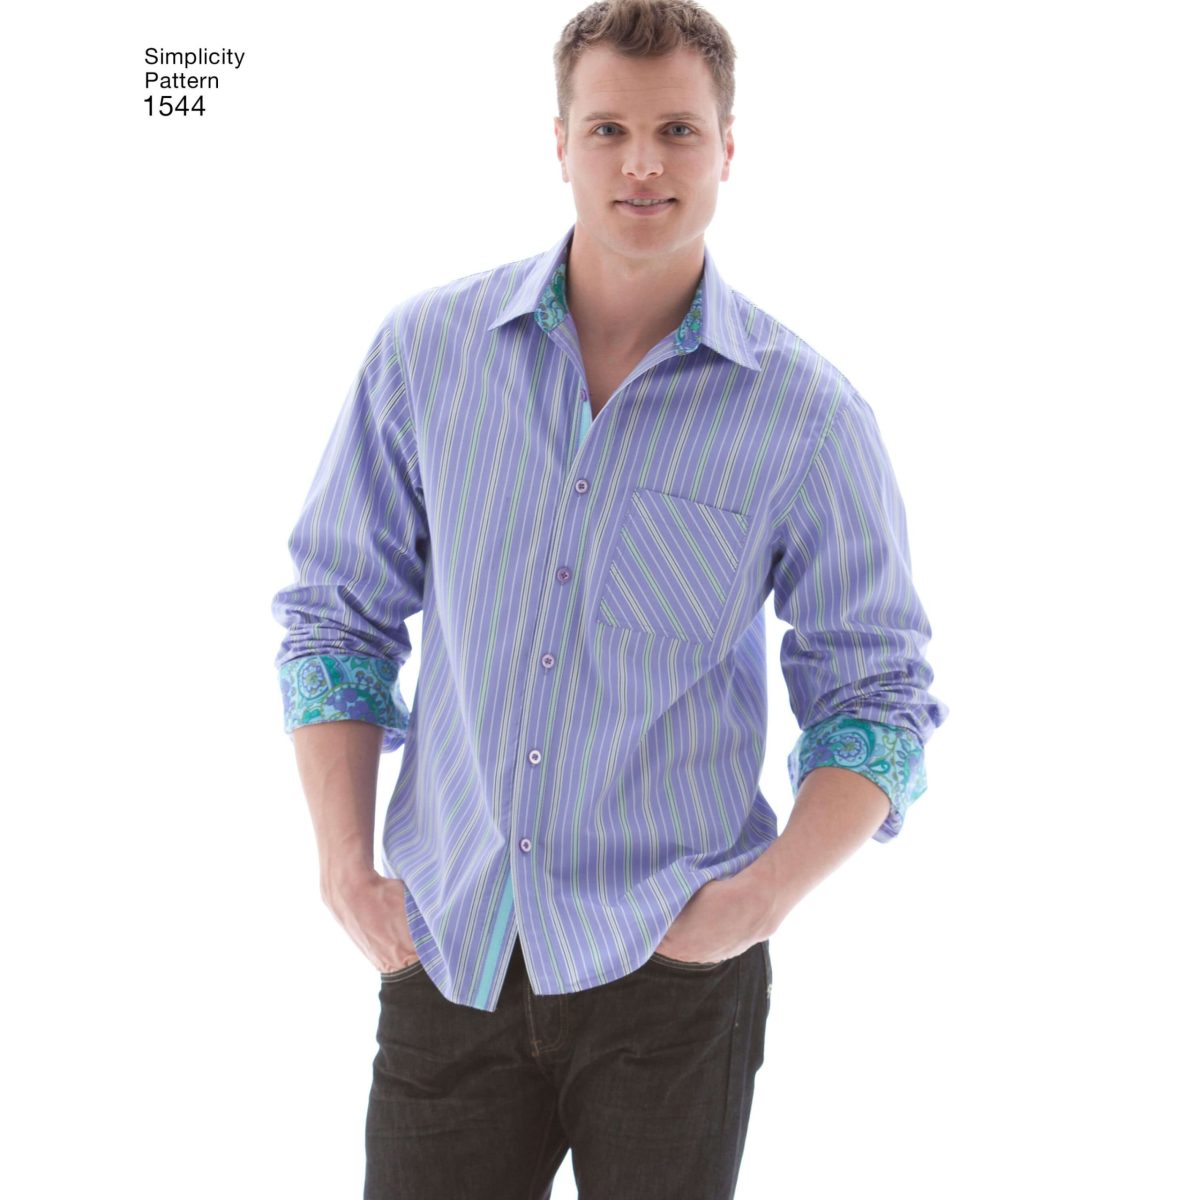 Simplicity Sewing Pattern 1544 Men's Shirt with Fabric Variations